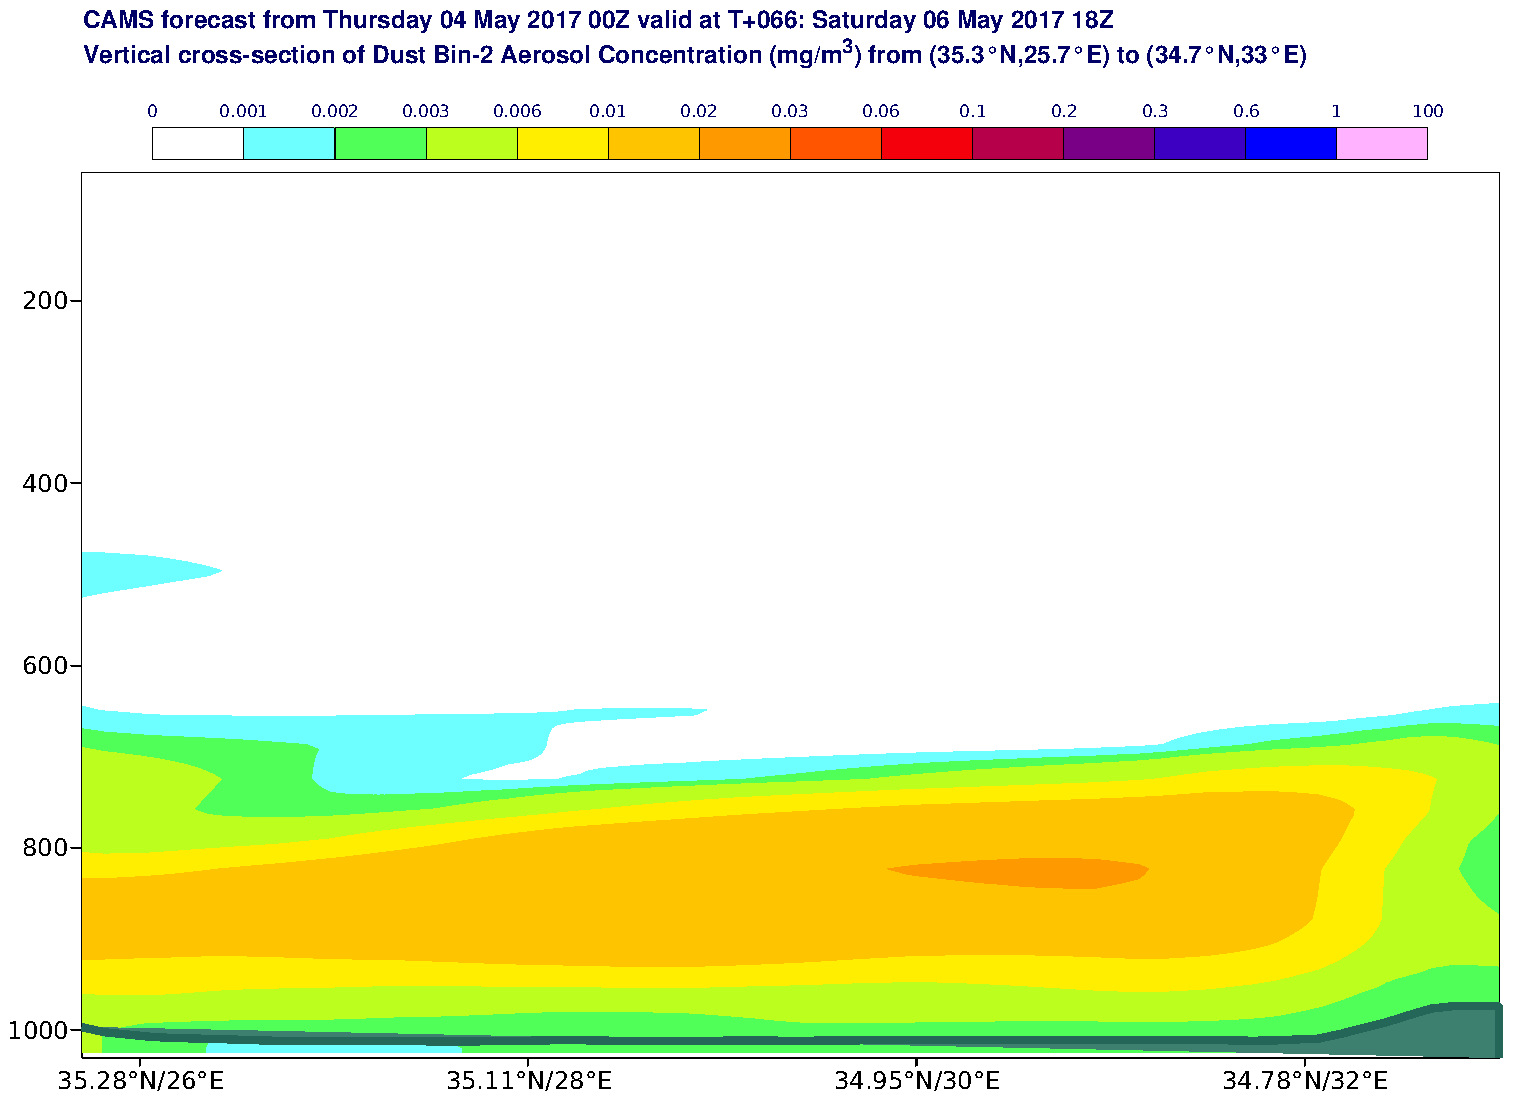 Vertical cross-section of Dust Bin-2 Aerosol Concentration (mg/m3) valid at T66 - 2017-05-06 18:00